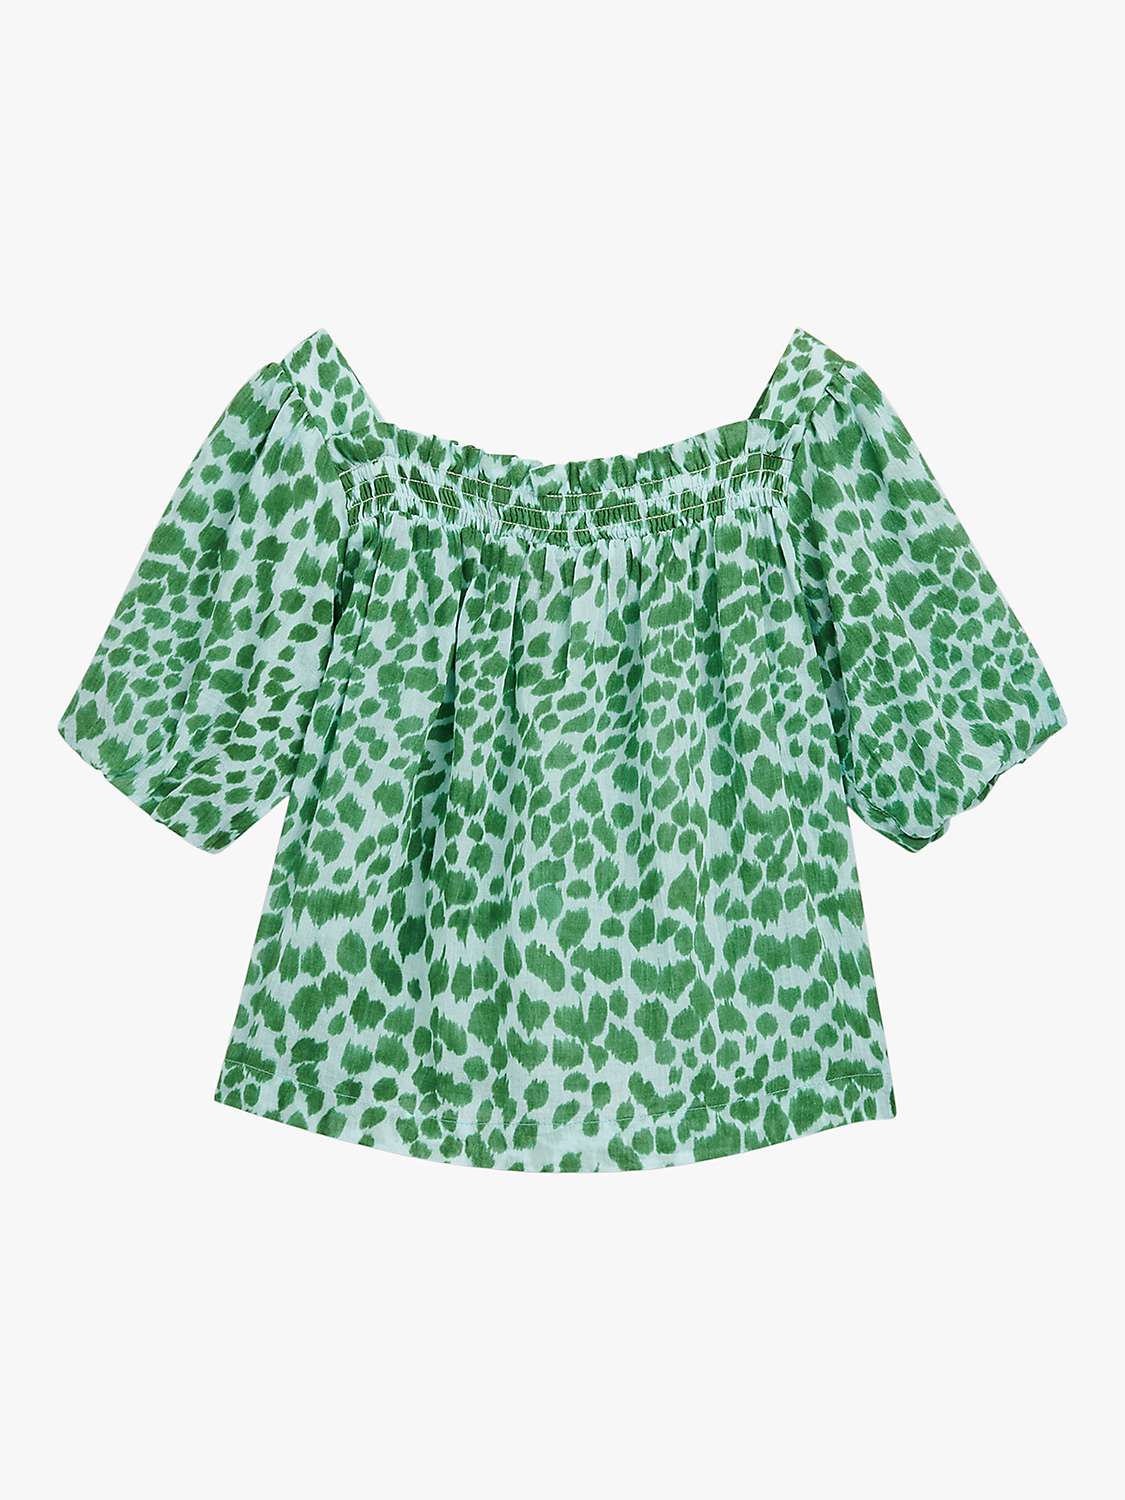 Buy Whistles Kids' Smooth Leopard Trapeze Top, Green/Multi Online at johnlewis.com